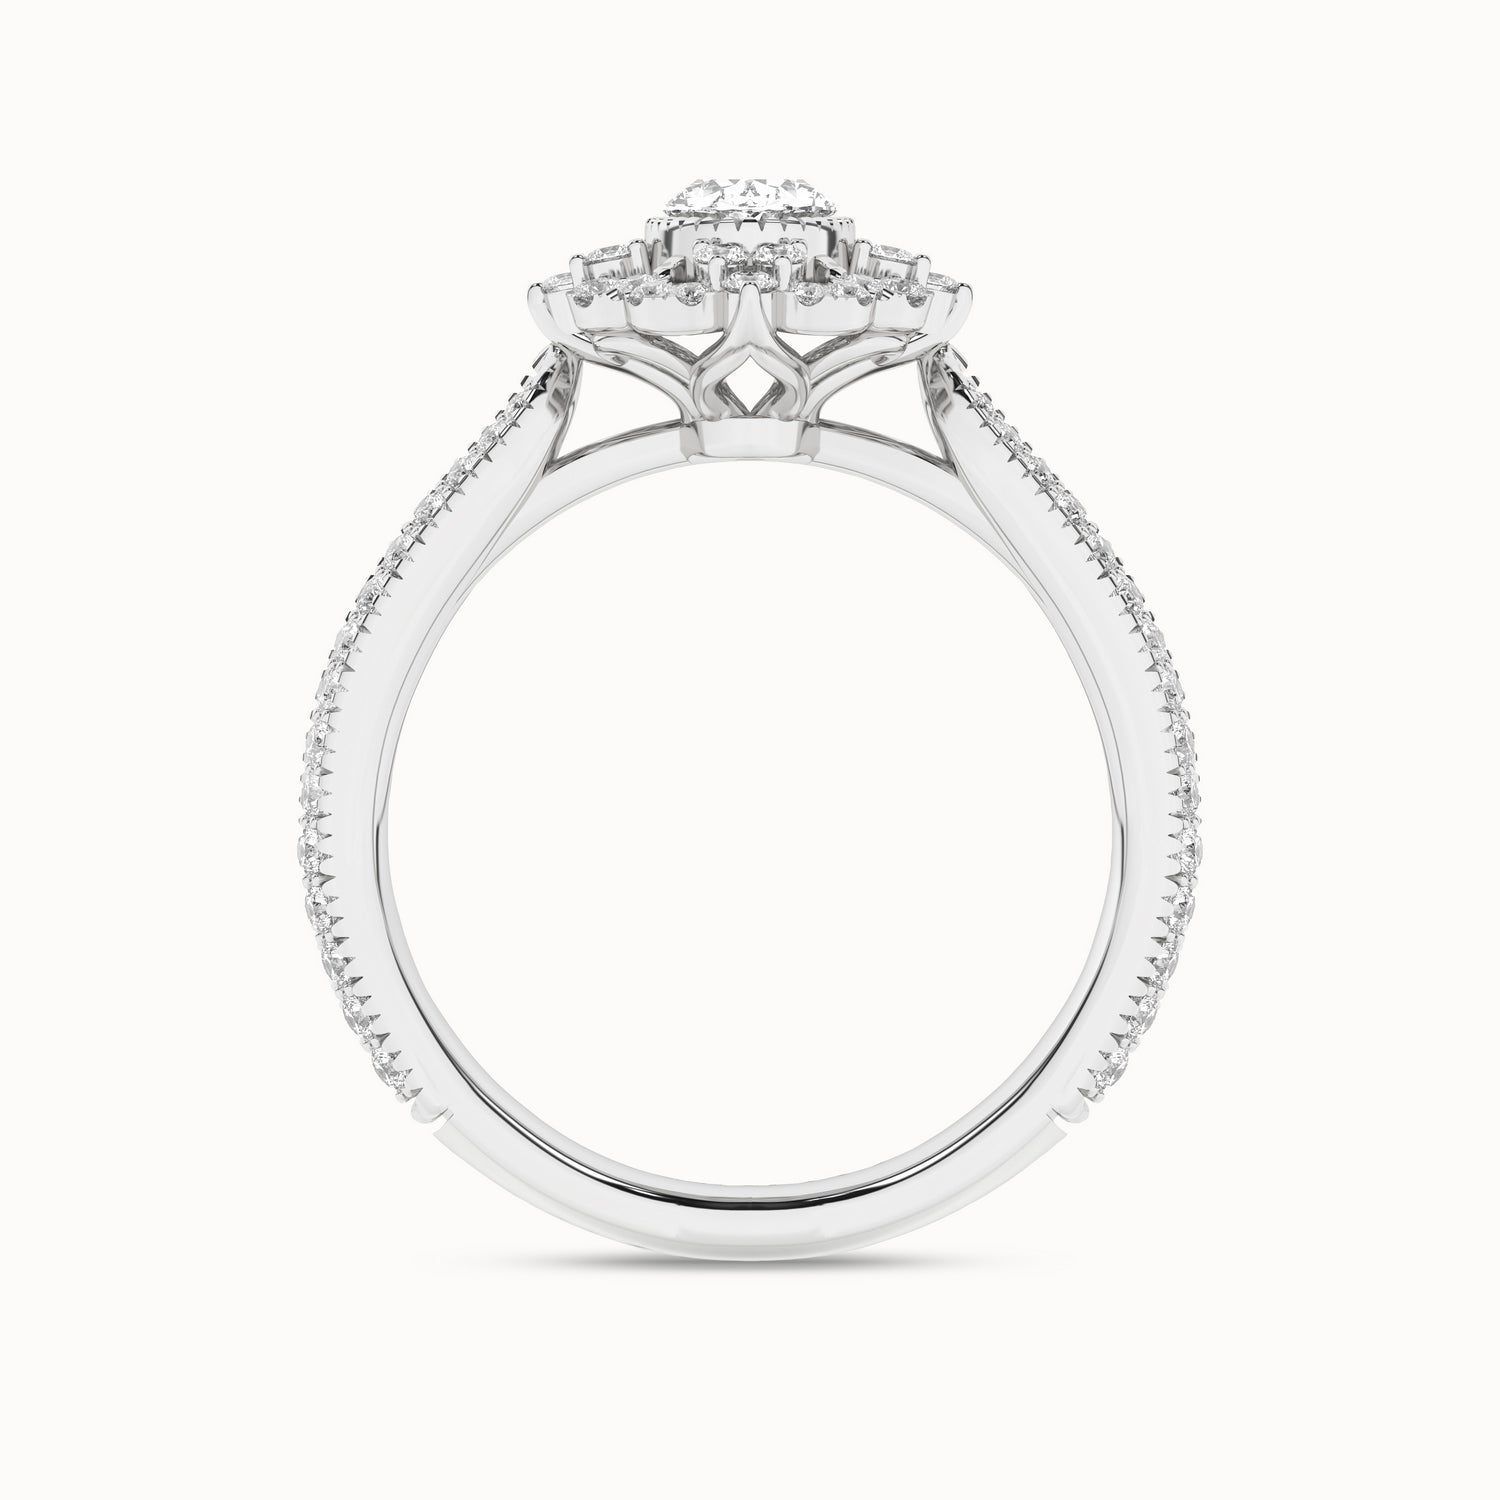 Ornate Ellipse Ring_Product Angle_1Ct - 2